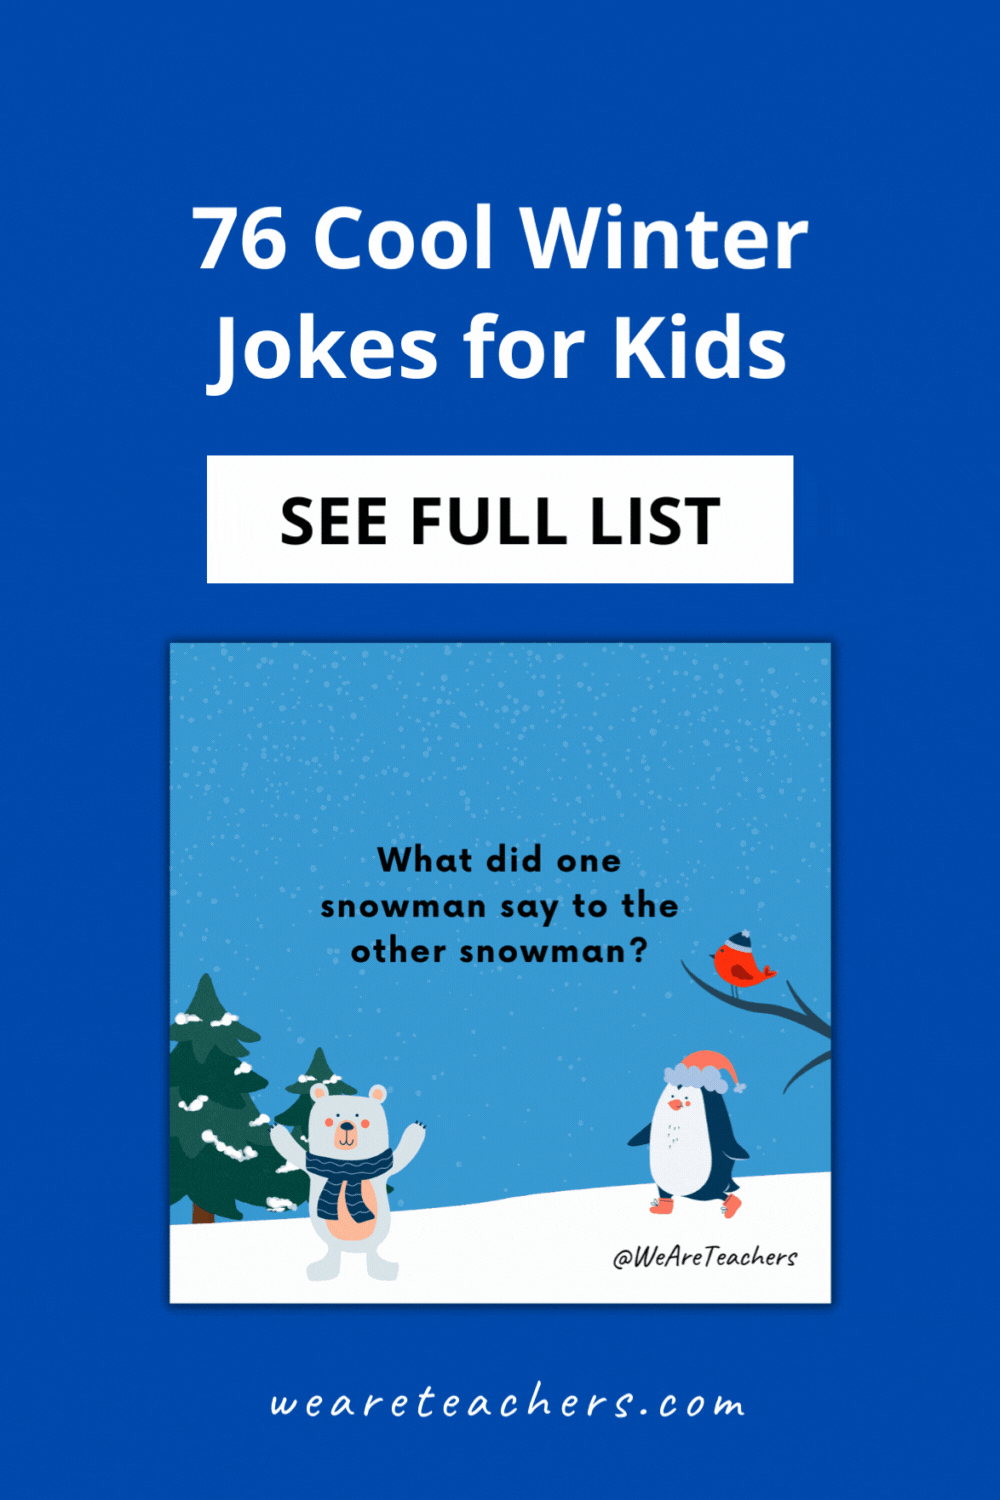 We could all use a good laugh this winter! Share some of these funny winter jokes for kids with your students.